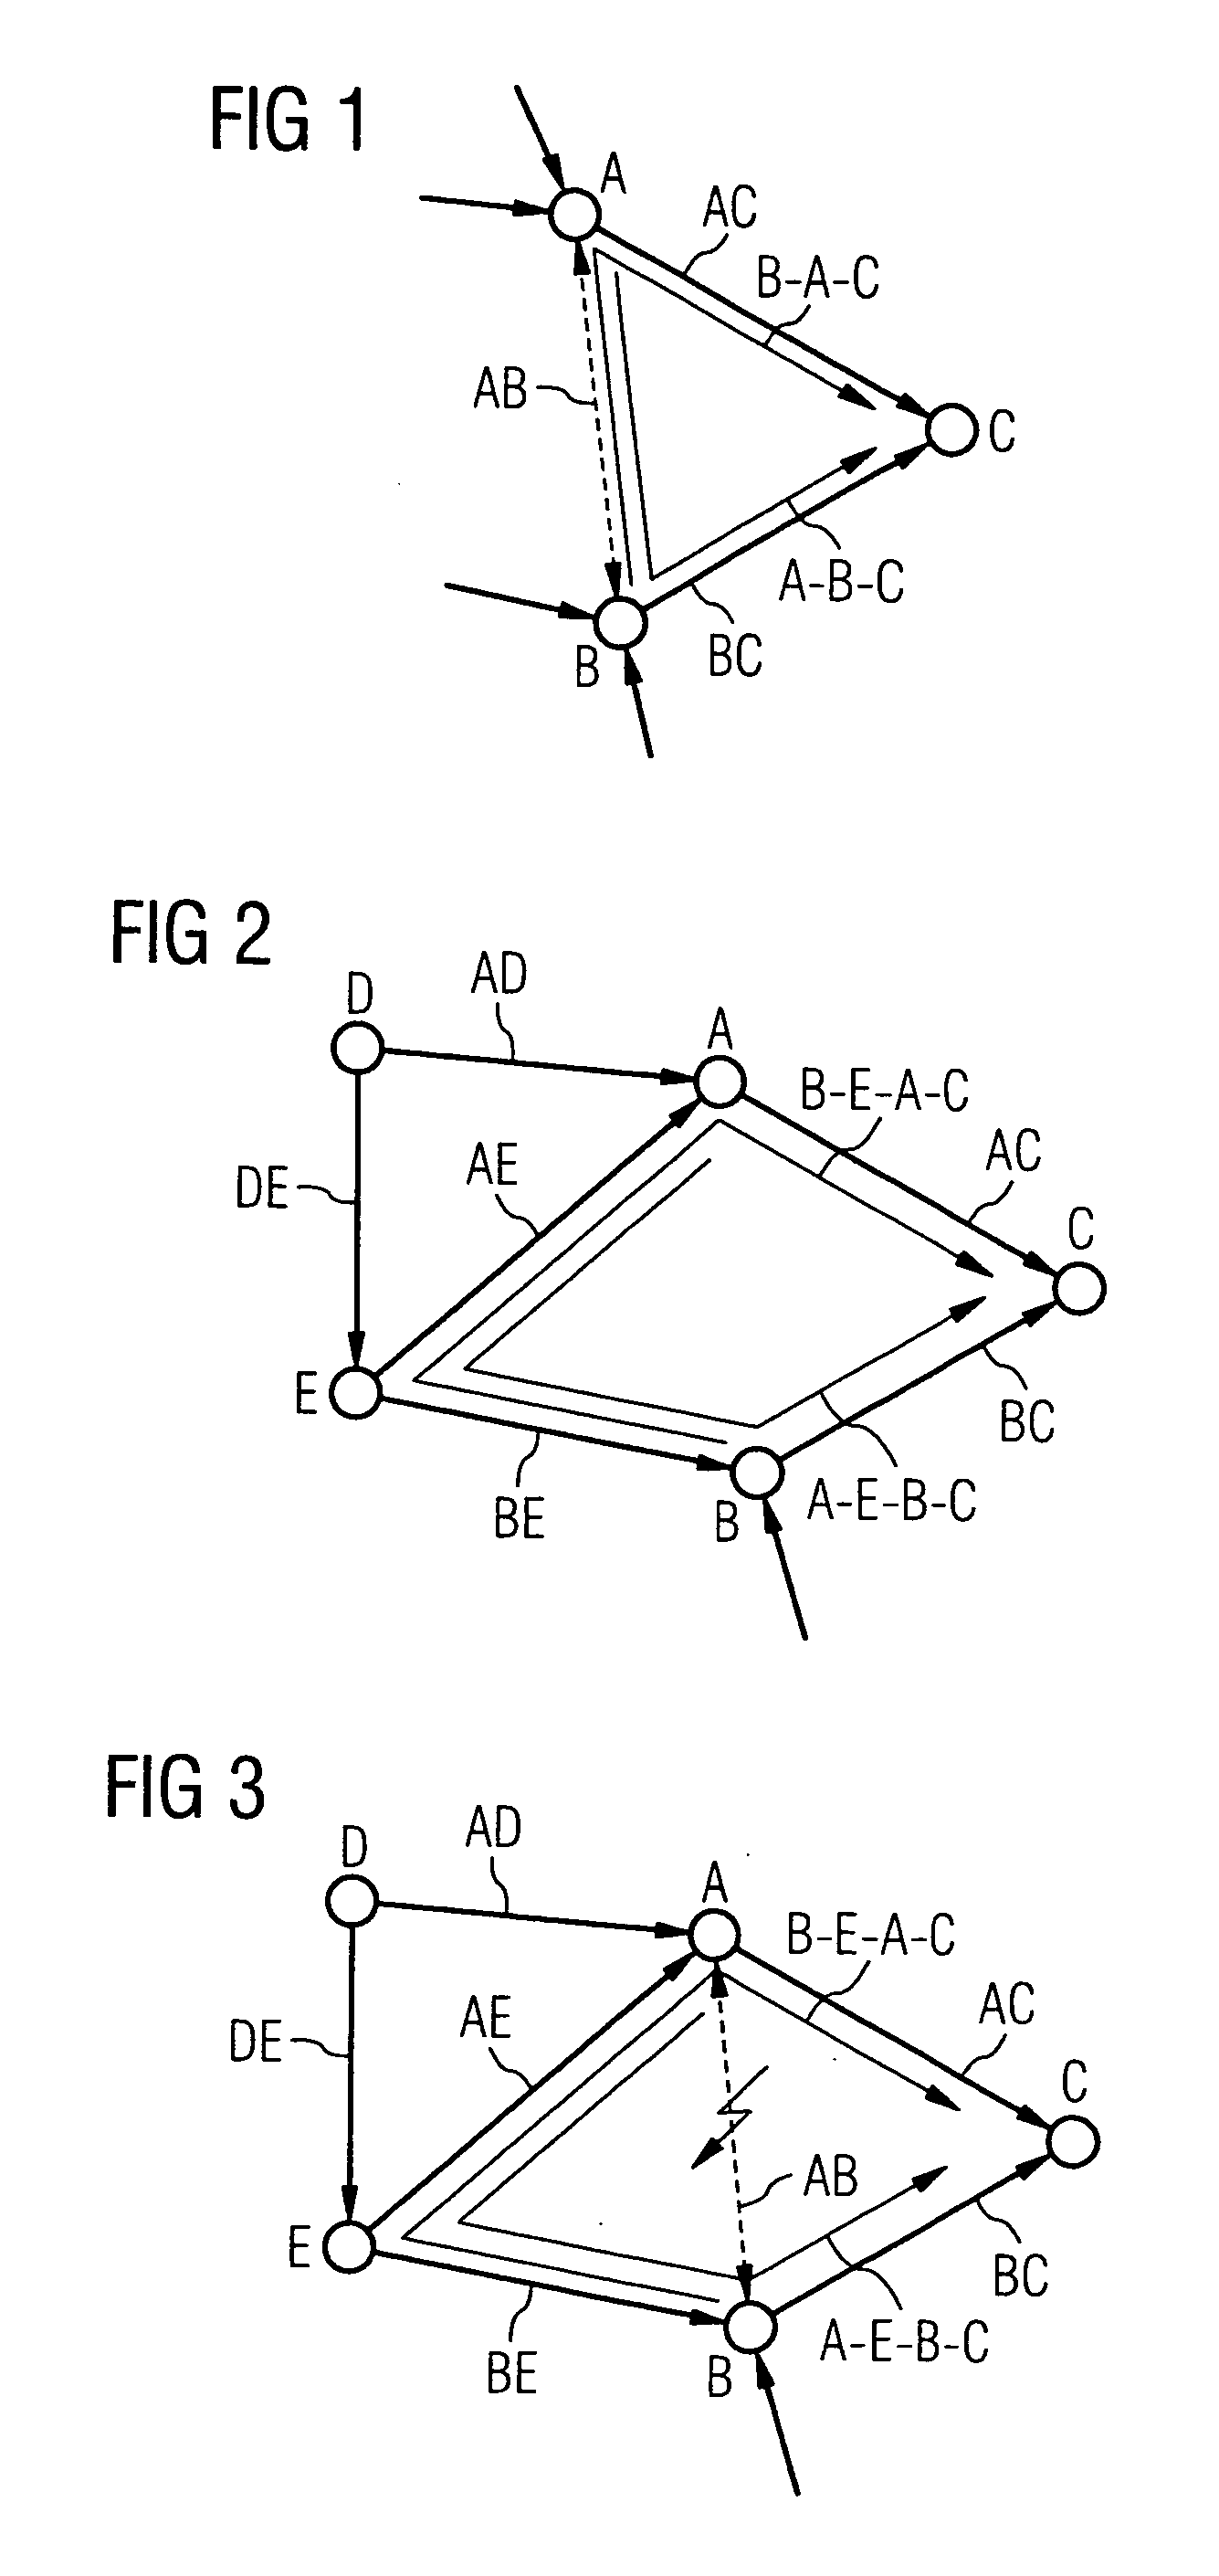 Method for routing data packets in a packet-switching communication network having several network nodes